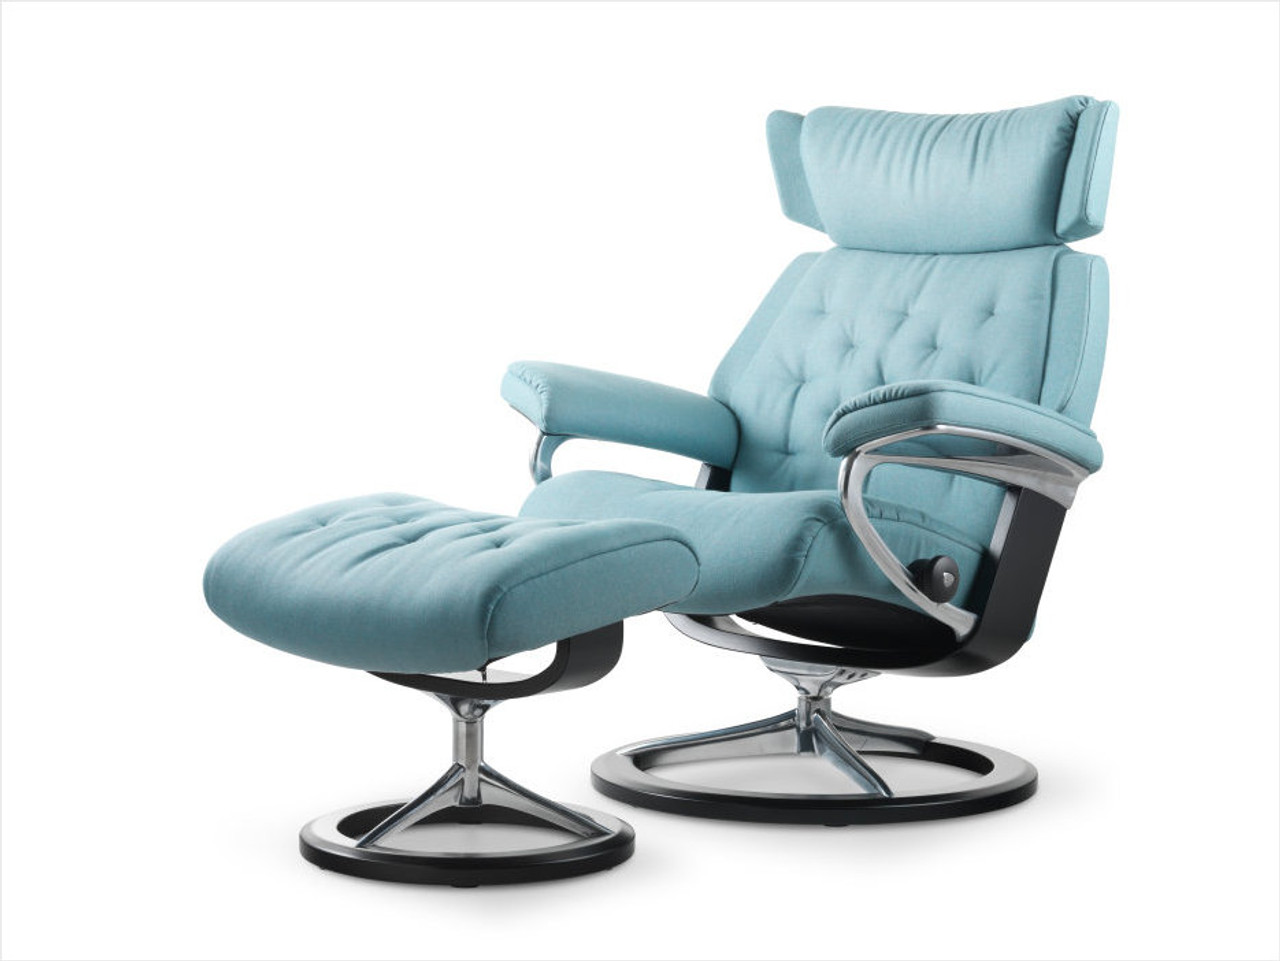 Stressless Skyline and Ekornes- North Recliner Ships in America by Fast Ottoman